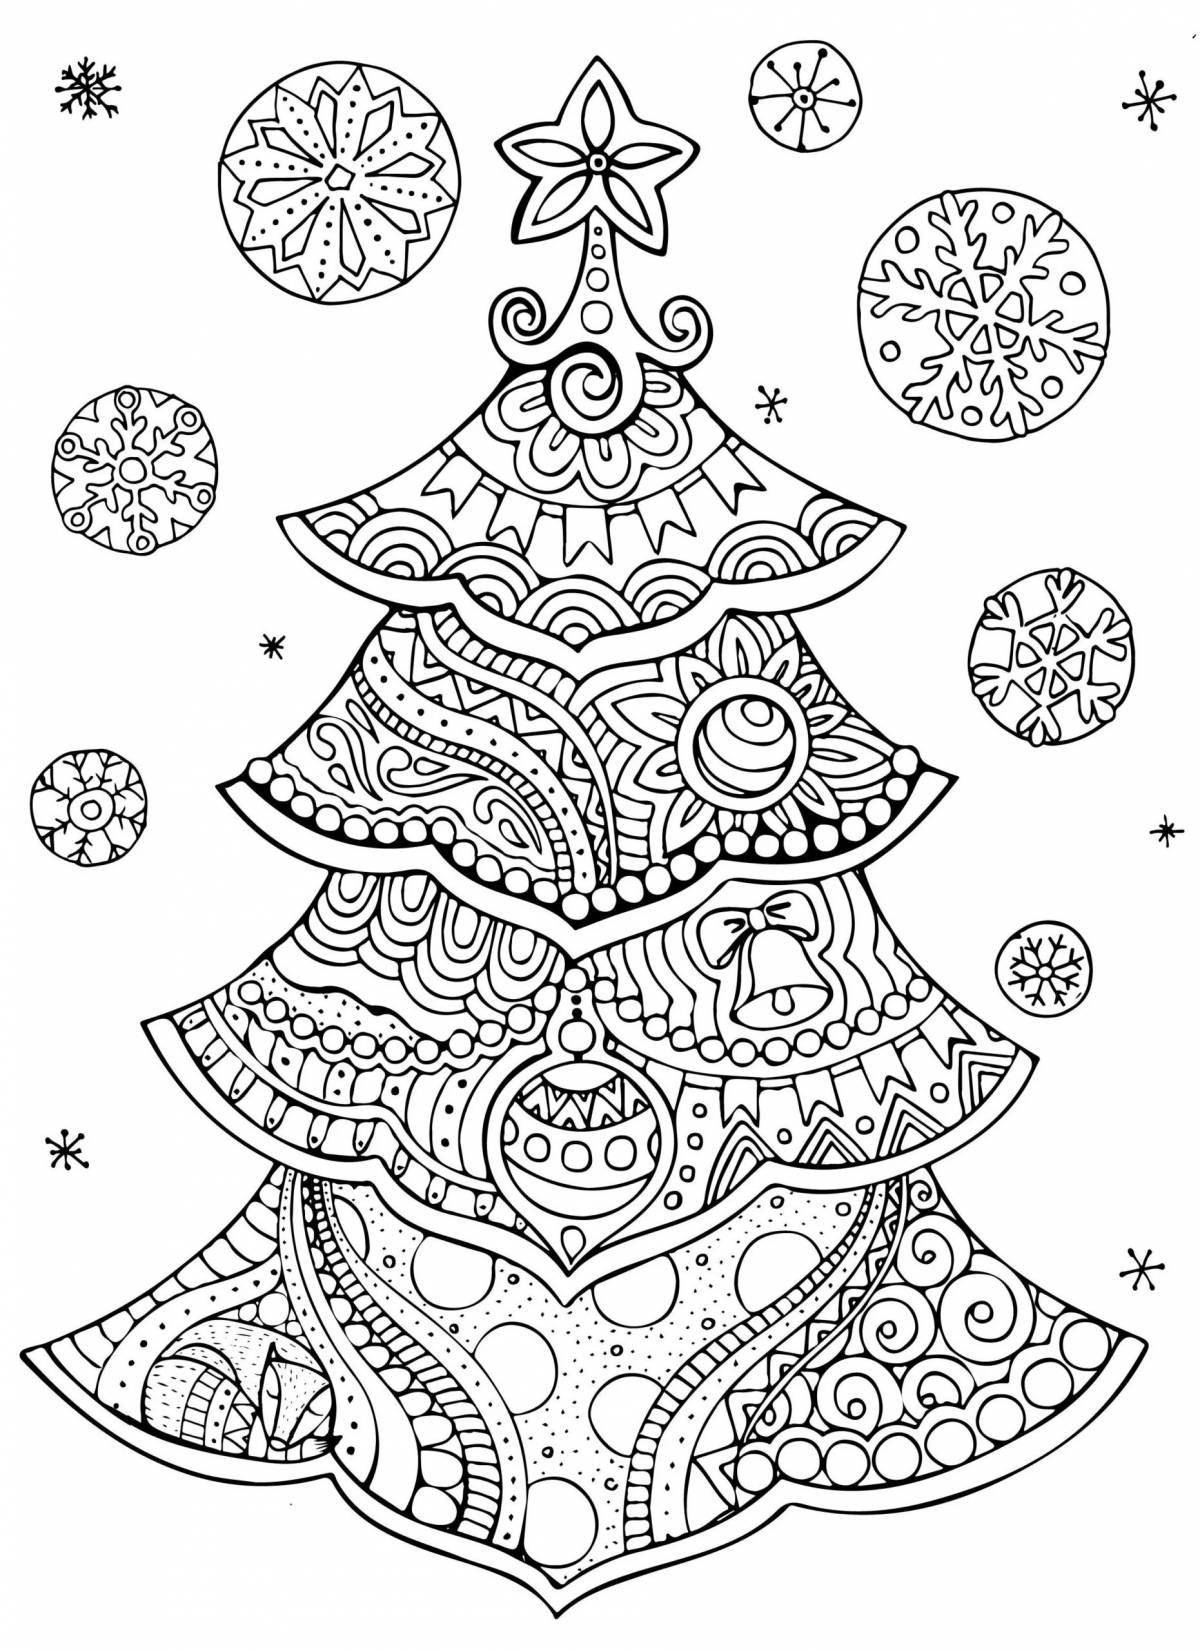 Ornate Christmas tree coloring page